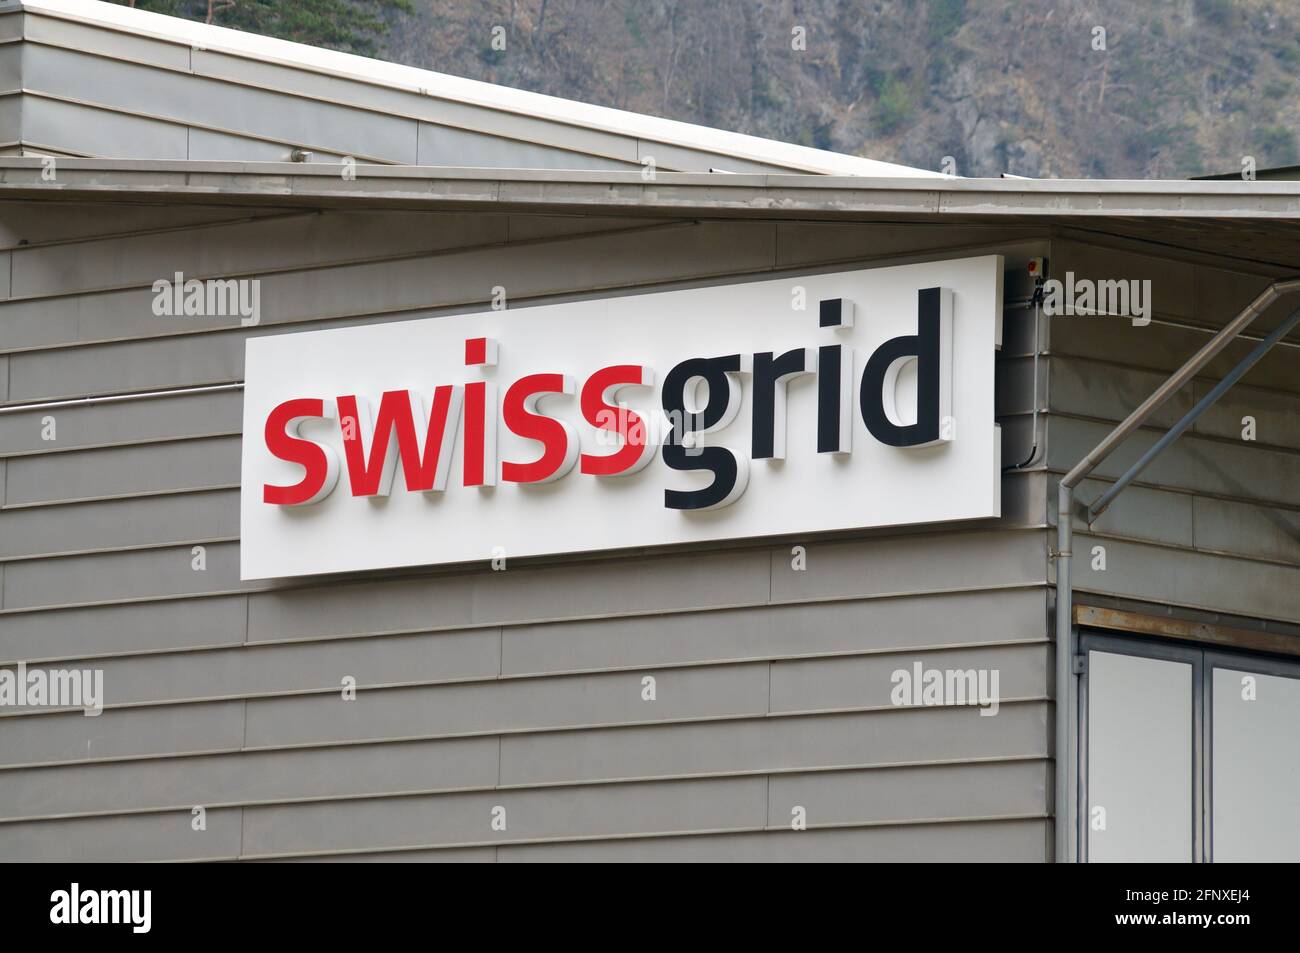 Amsteg, Uri, Switzerland - 18th April 2021 : View of the Swissgrid company sign hanging on a building in Amsteg. Swissgrid is the Swiss grid transmiss Stock Photo